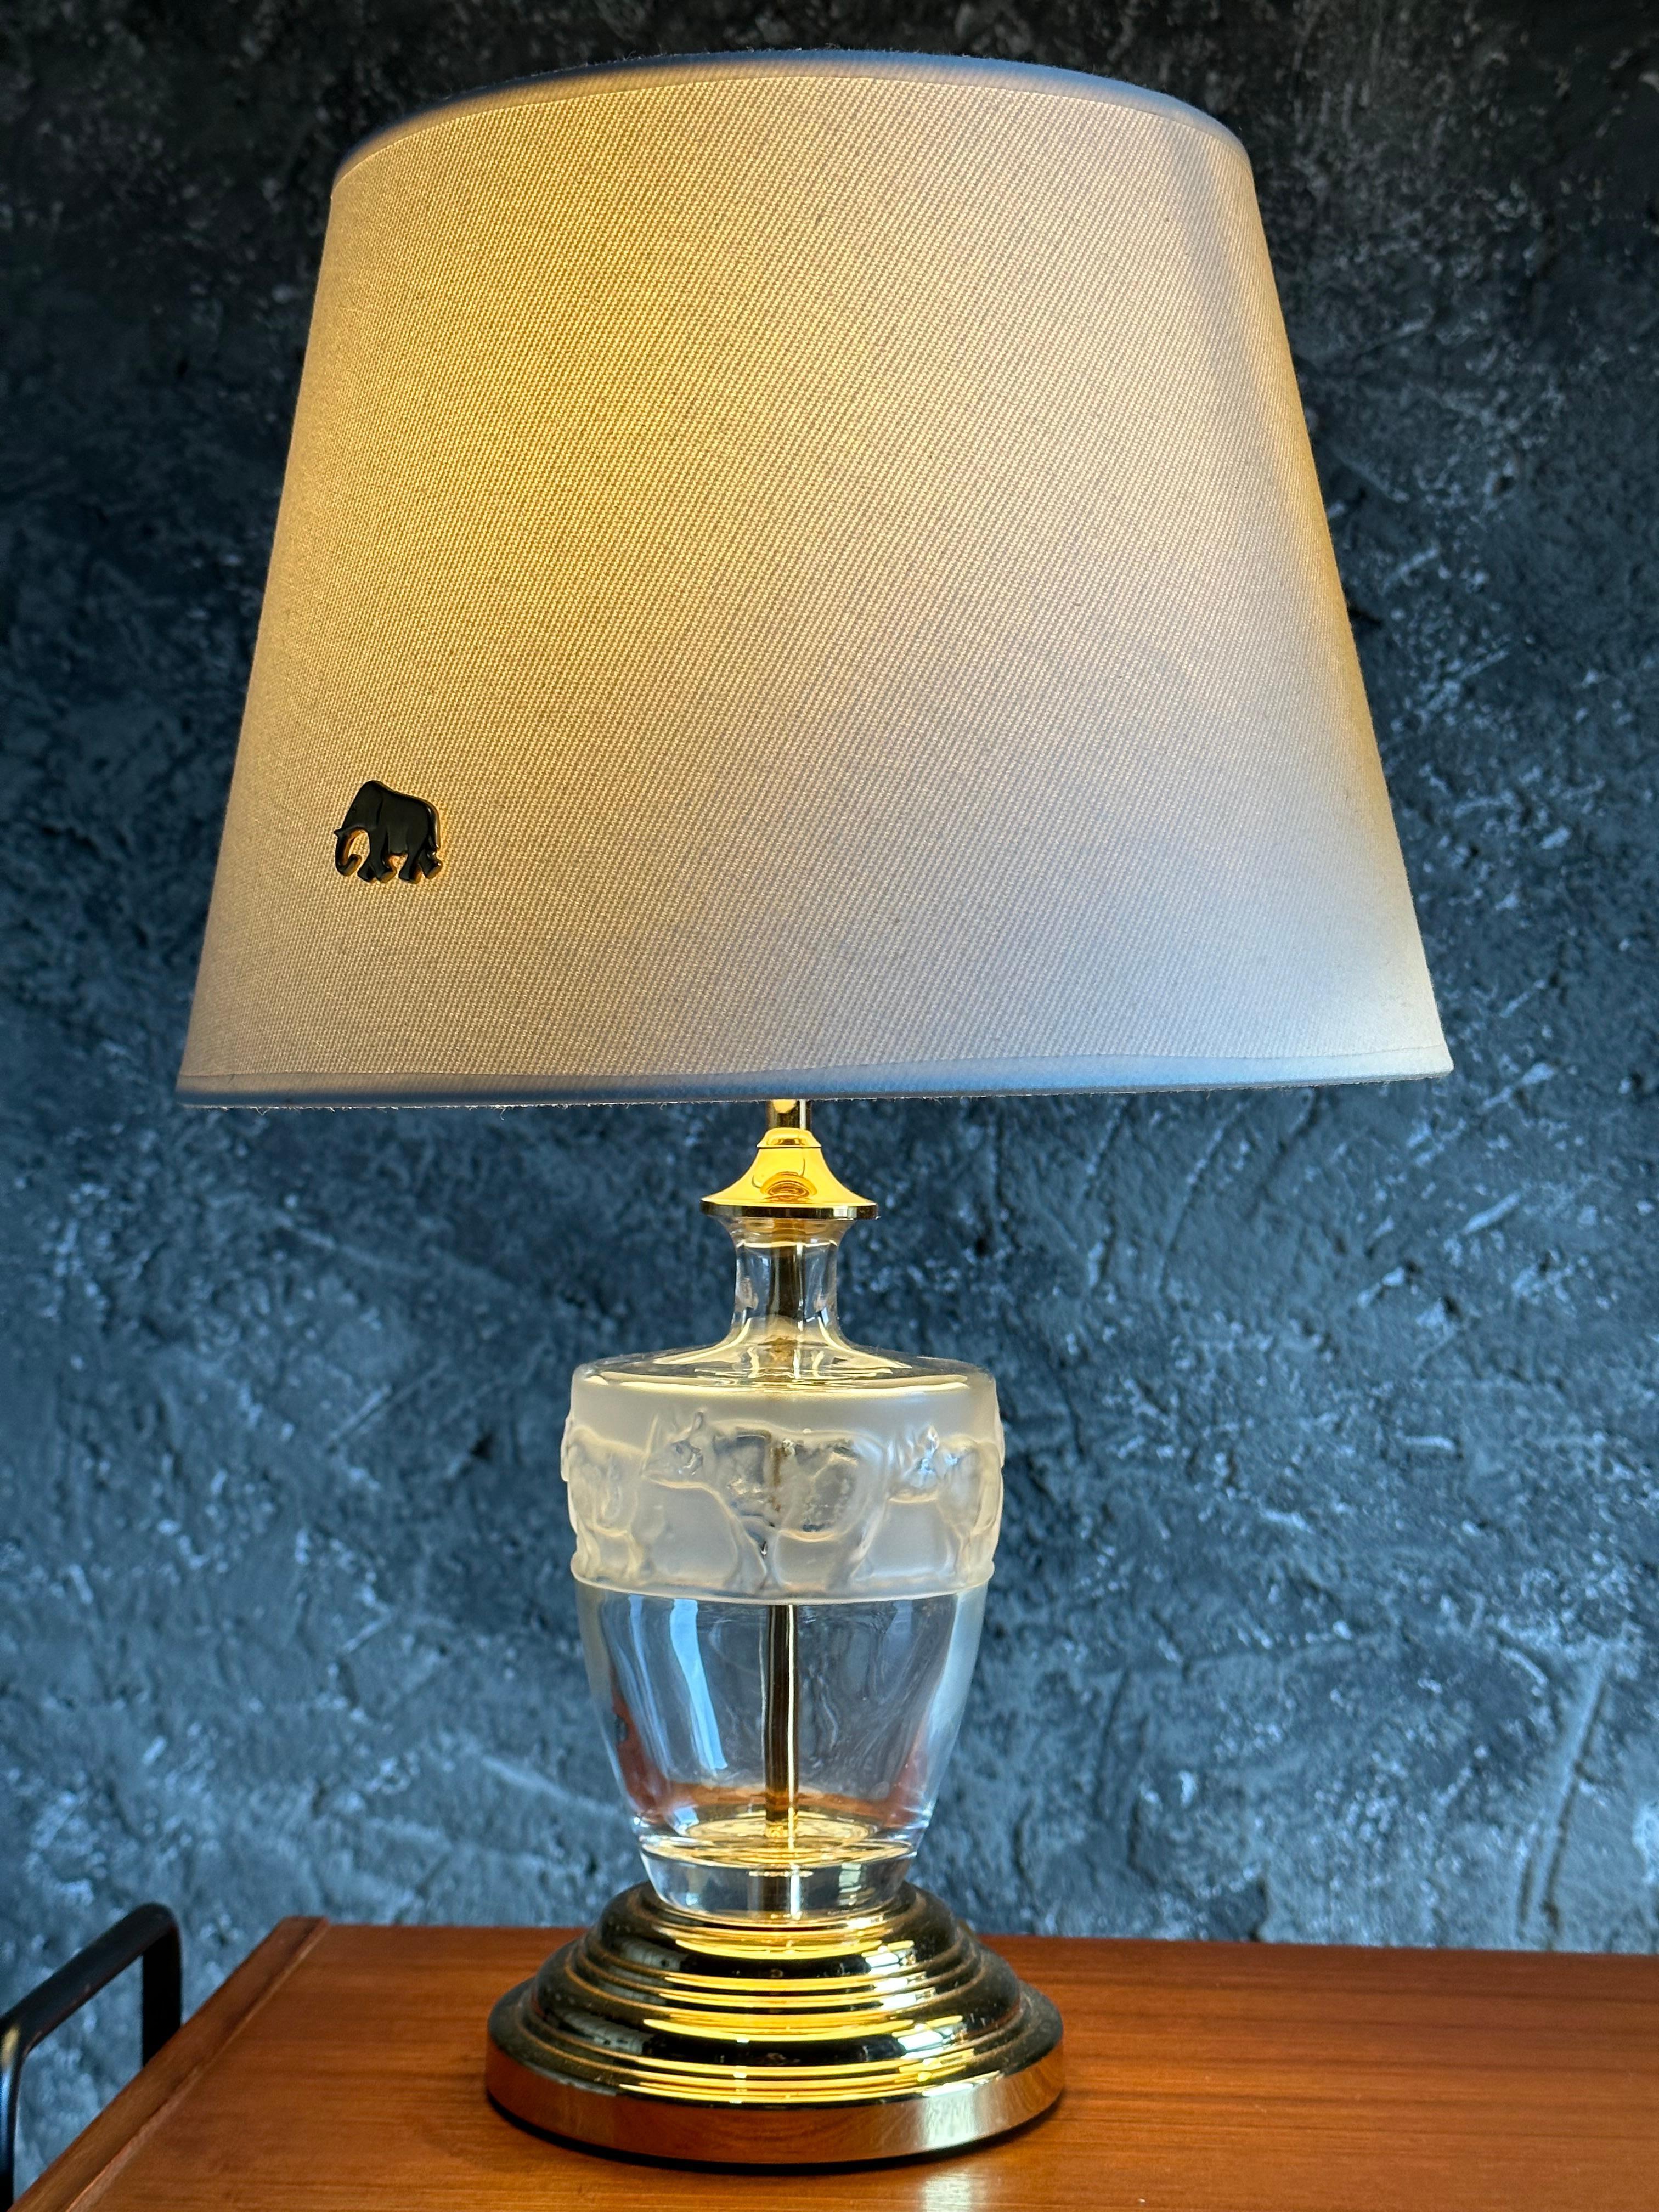 Mid-20th Century Pair of Midcentury Murano Table Lamps, Africa Design, Brass. Italy 1960s